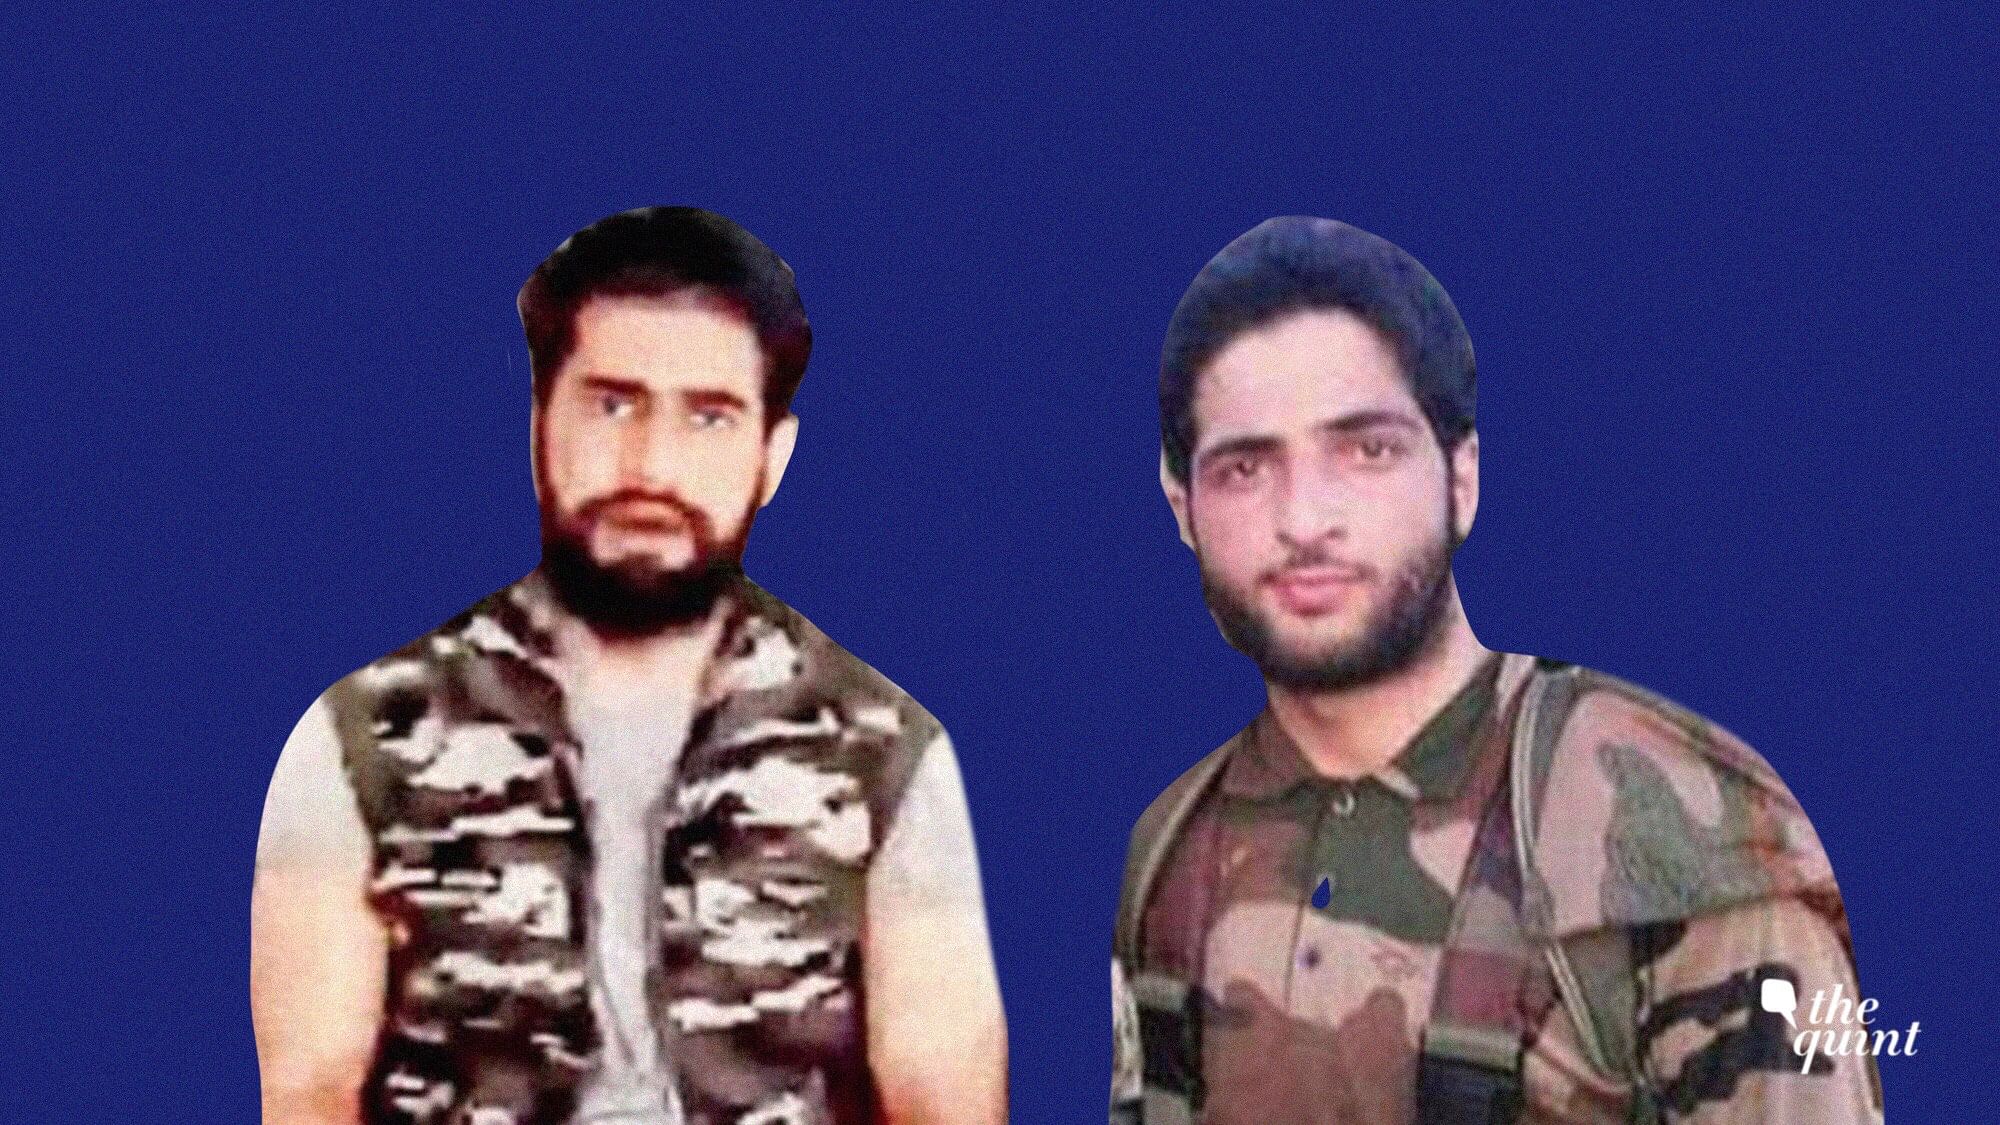 Zakir Musa and Burhan Wani, two (slain) militant commanders of the Hizbul Mujahideen, both hailed from Tral in Kashmir. Image used for representational purposes.